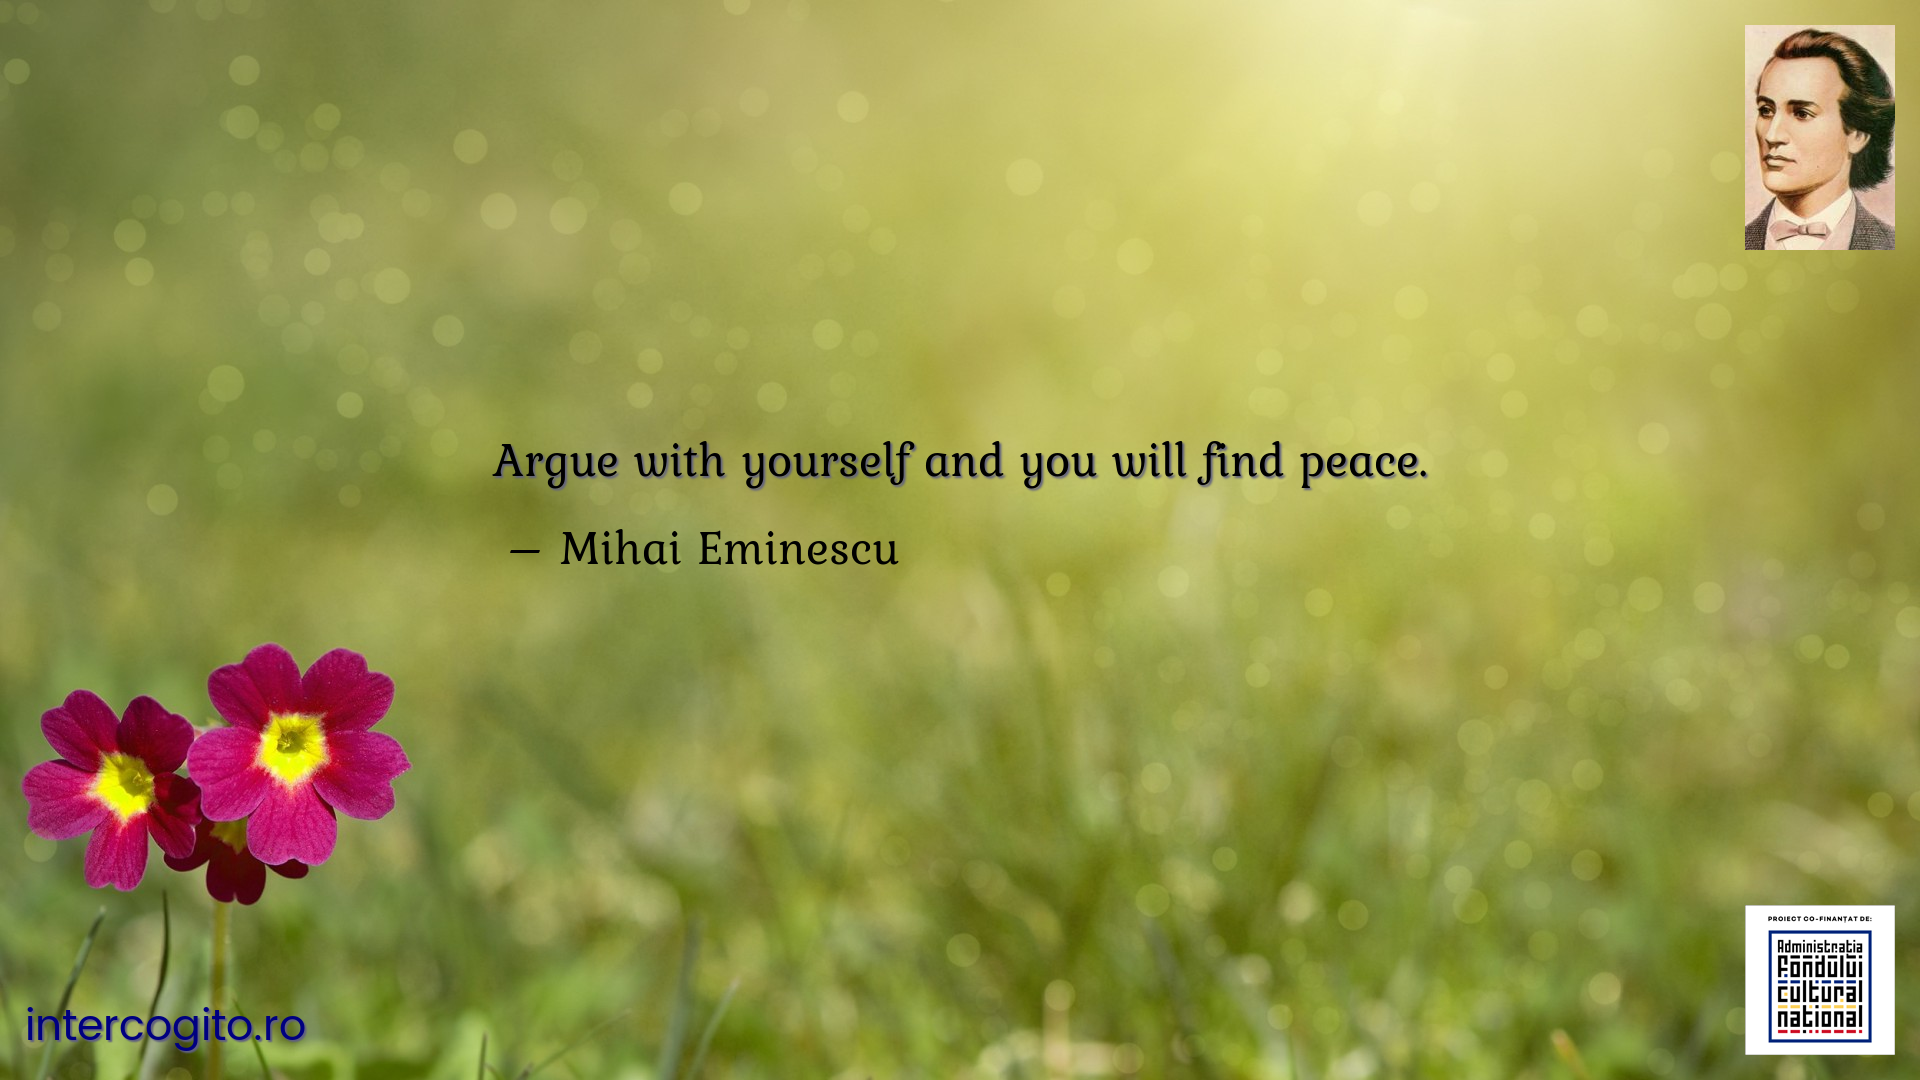 Argue with yourself and you will find peace.